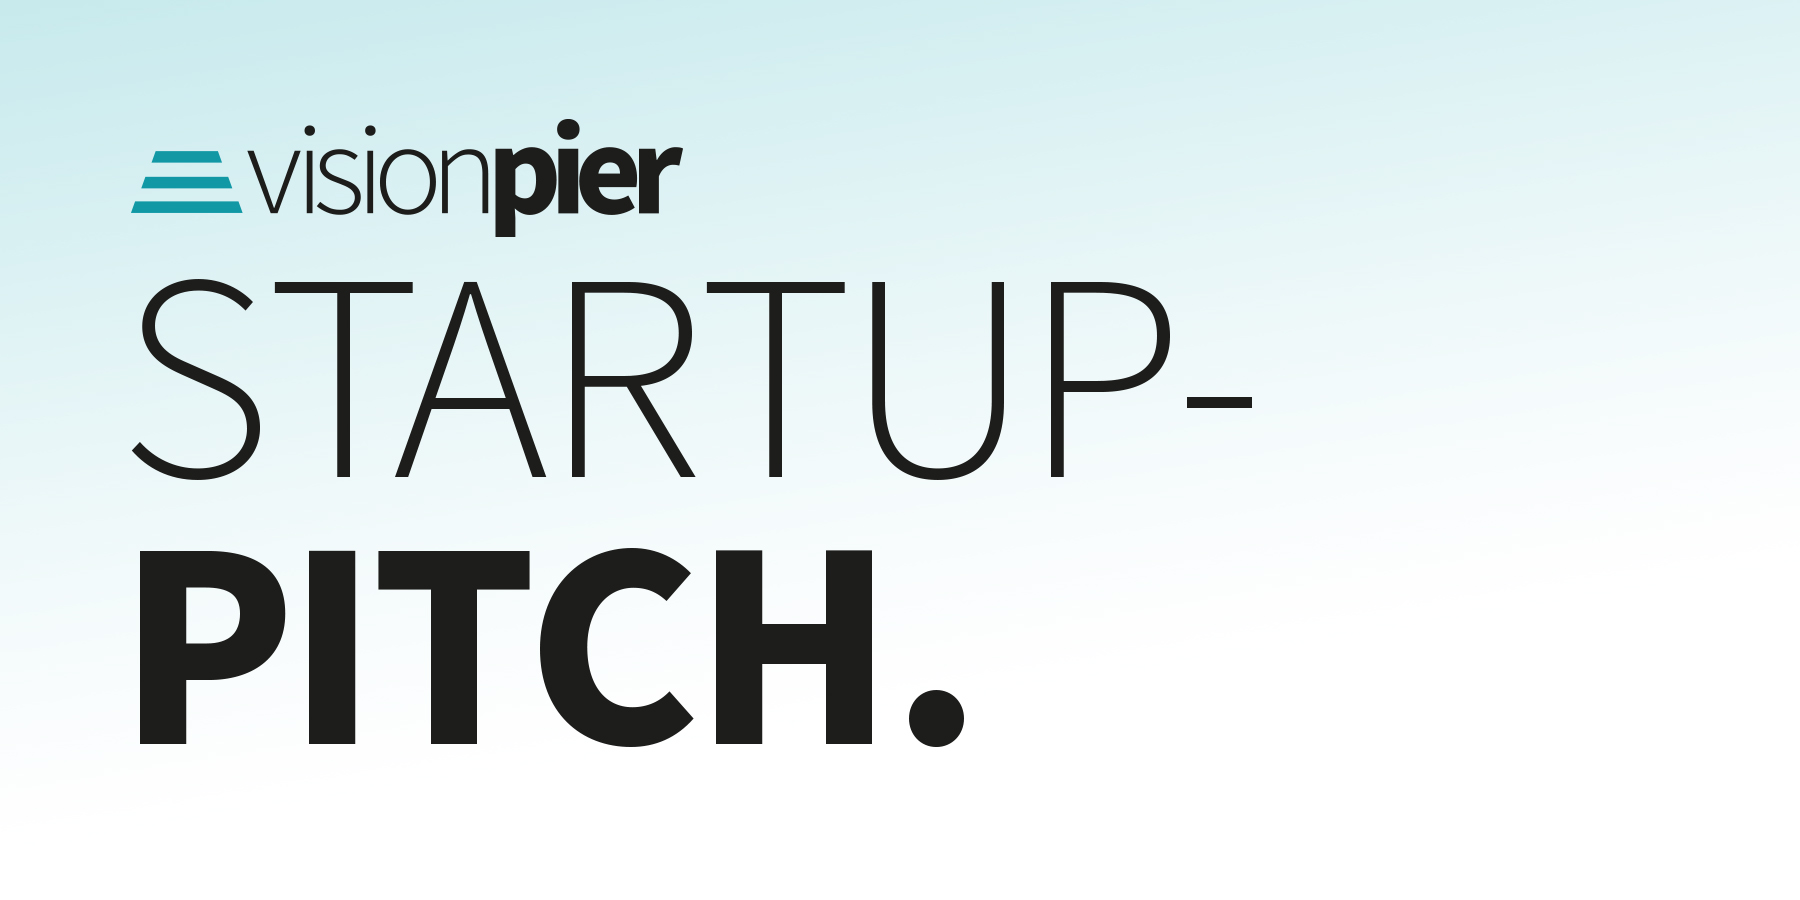 On 18 April 2023, visionpier will host German/North American Startup Pitch with 6 companies each.